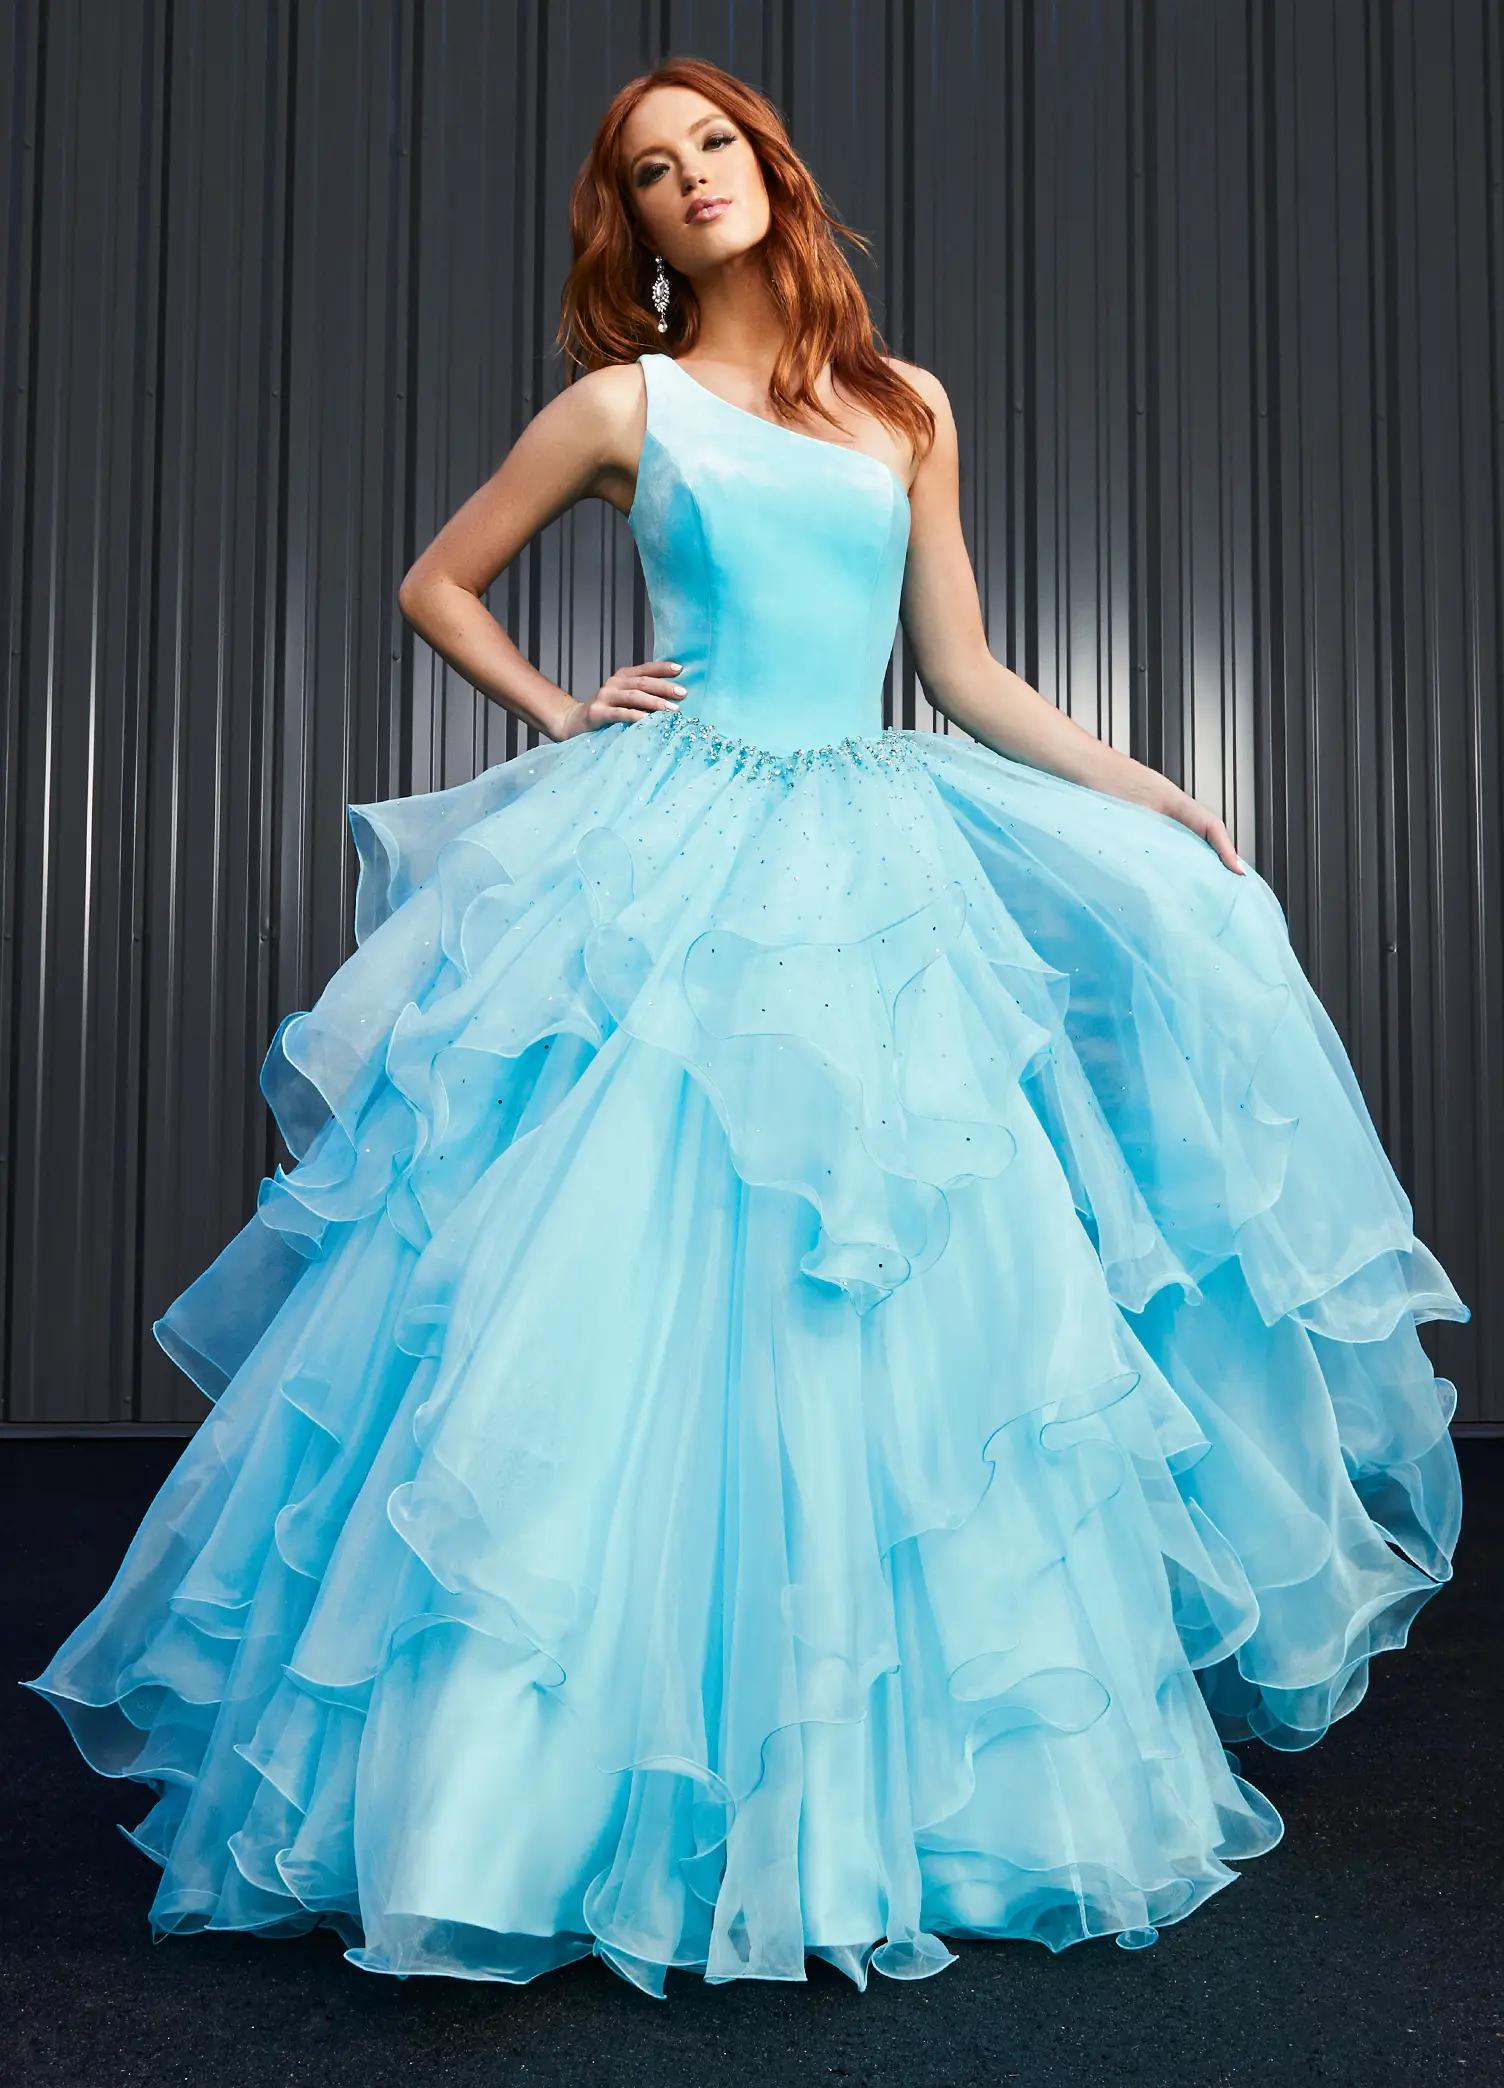 Luxury Rhinestone Beaded Organza Quinceanera Ball Gown - Lunss